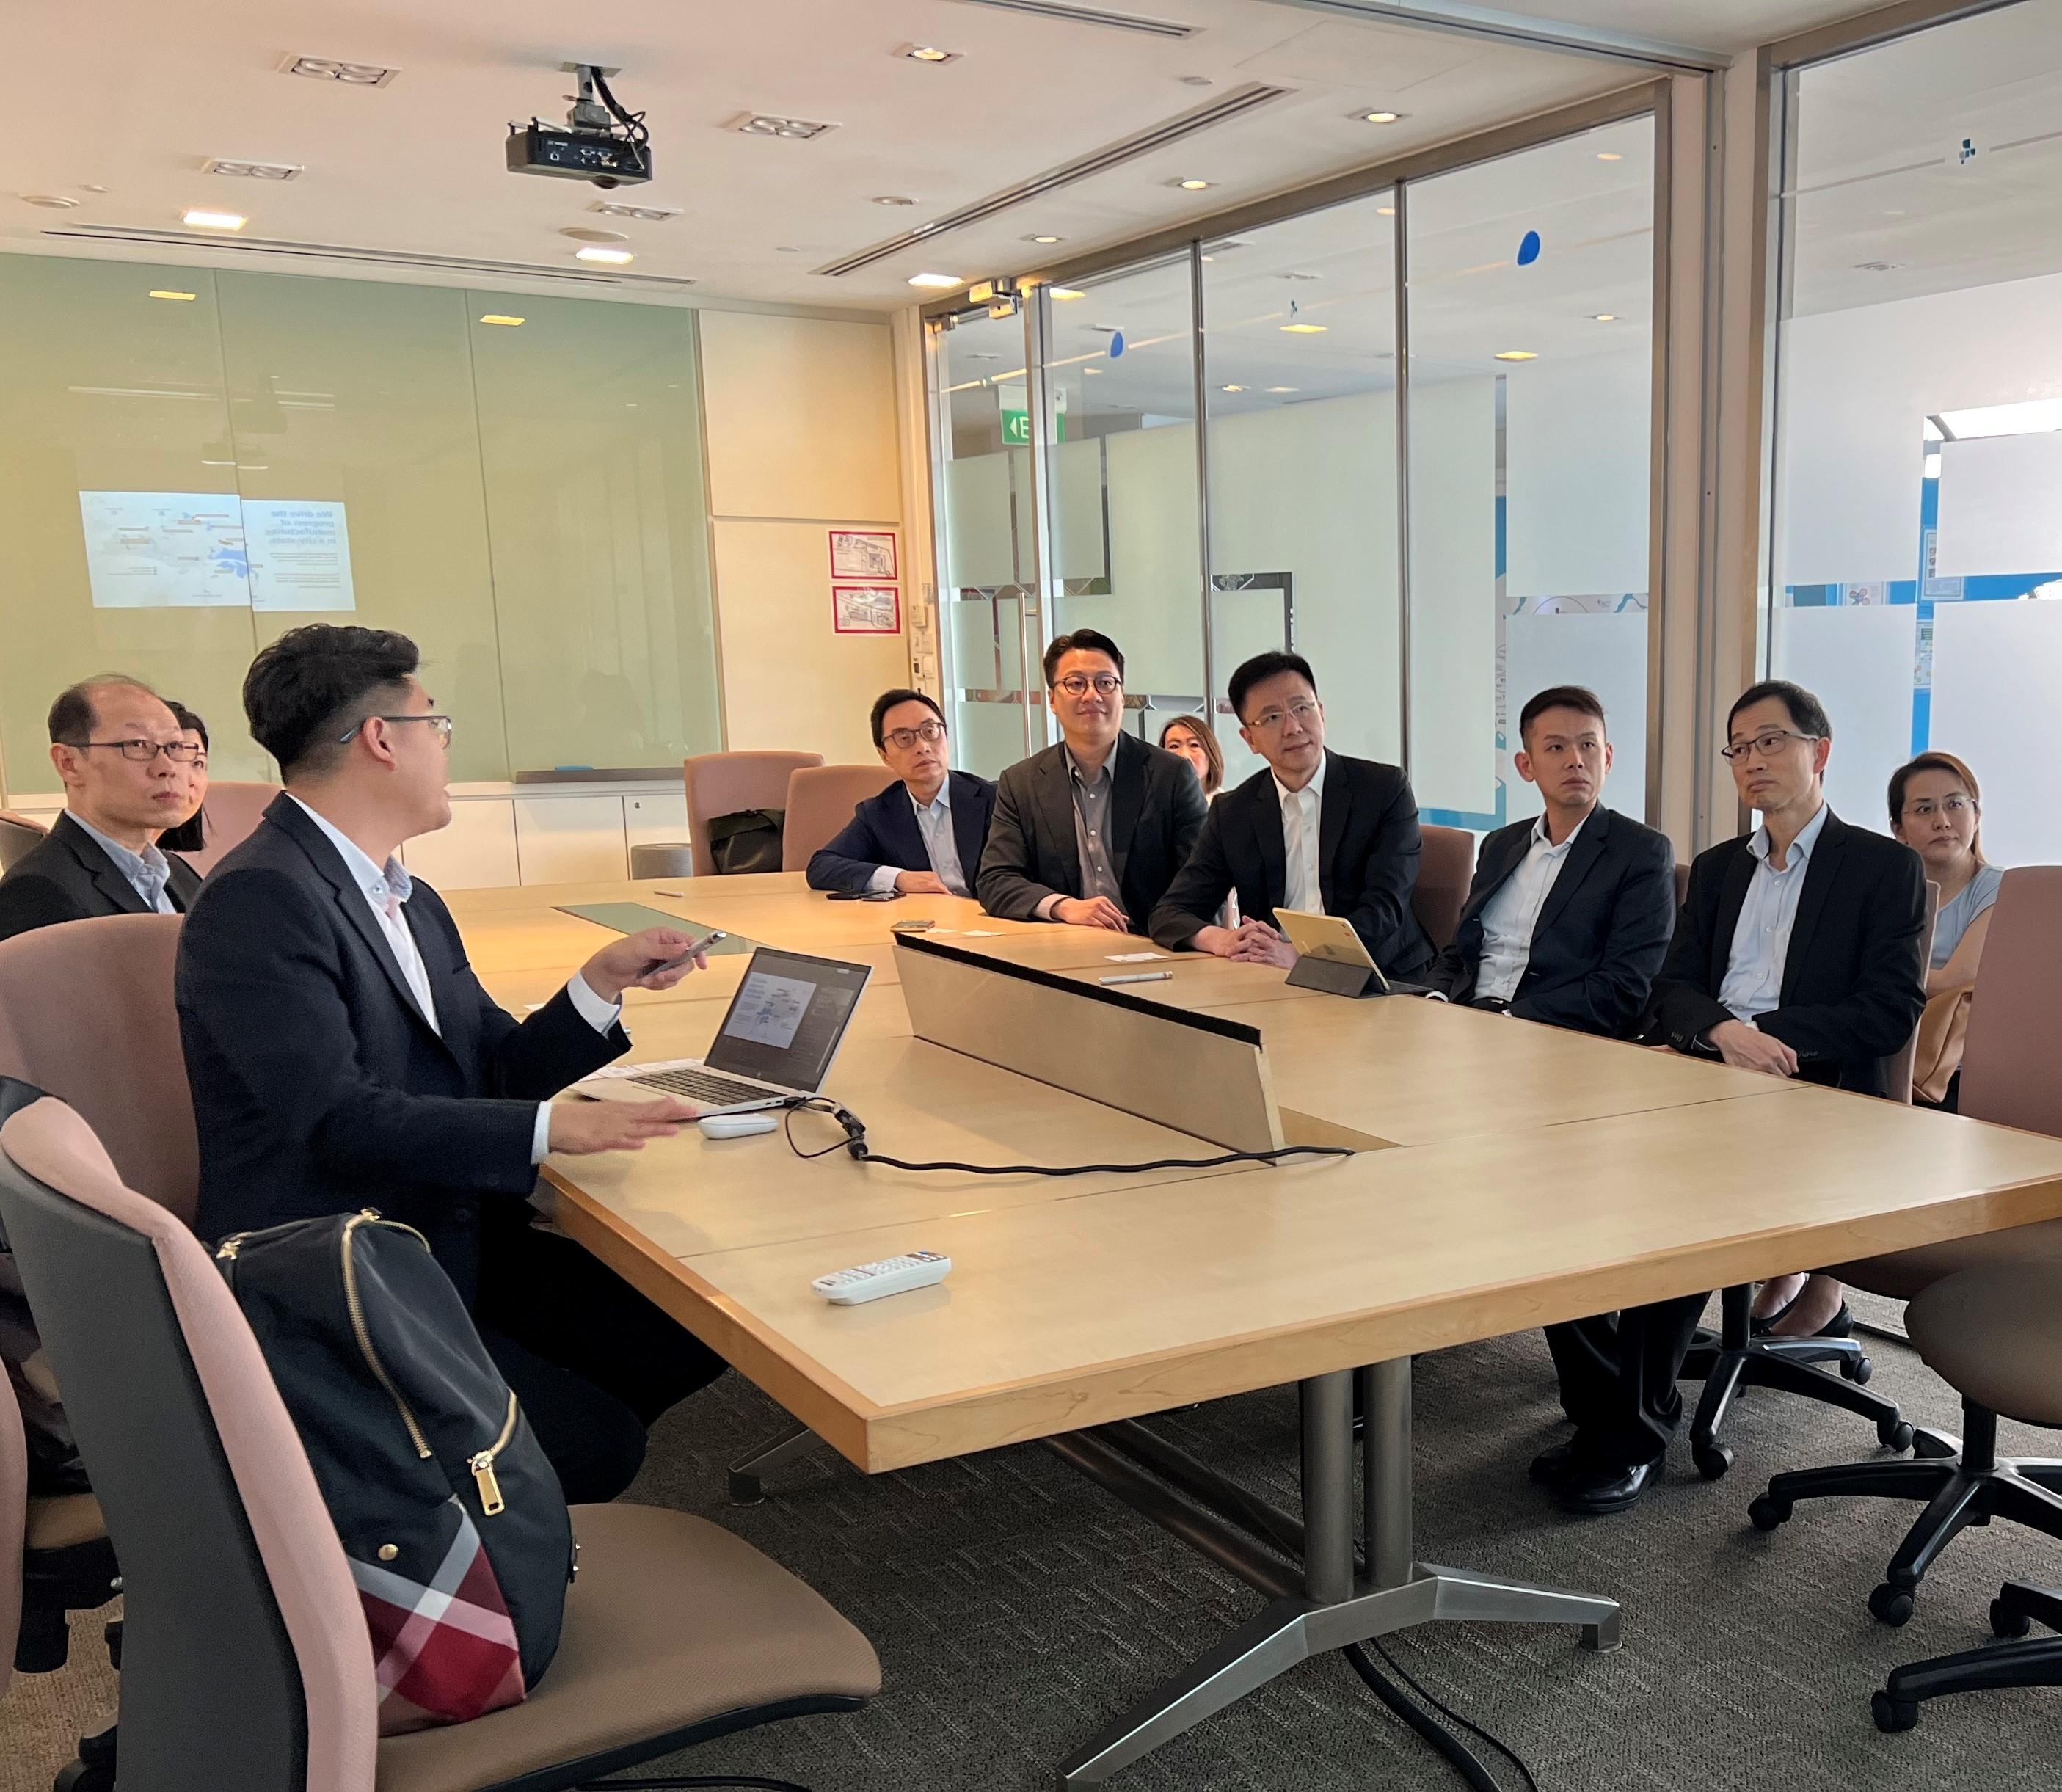 The Secretary for Innovation, Technology and Industry, Professor Sun Dong (third right), visits the JTC Corporation in Singapore today (May 24) and receives a briefing on the corporation's various landmark projects, latest efforts in spearheading sustainable industrial development, and breakthroughs from public-private research collaborations.